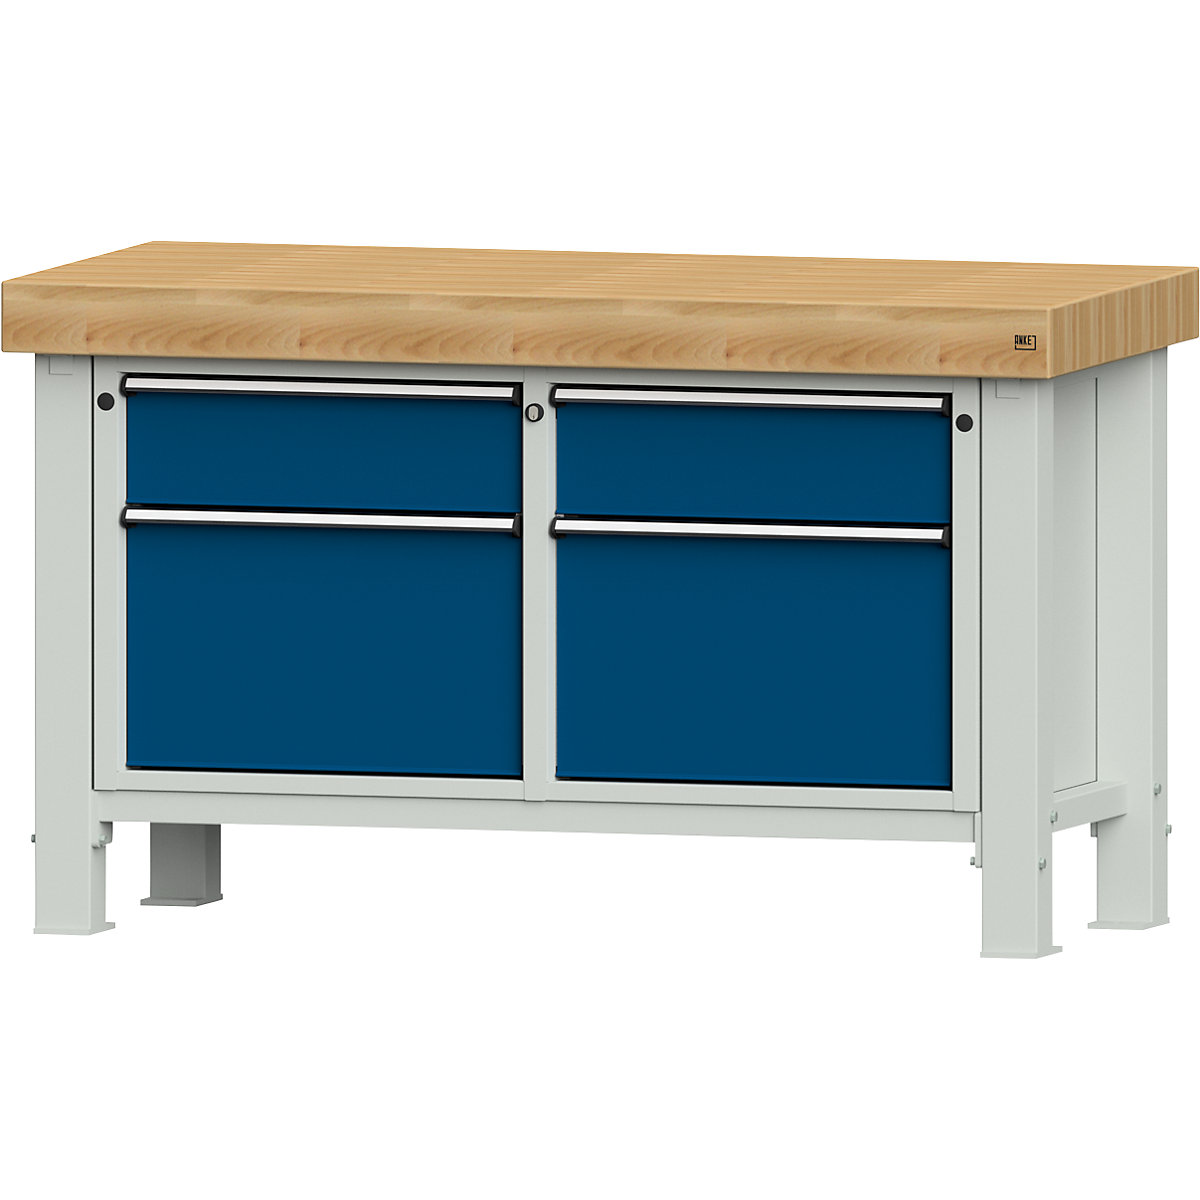 Heavy duty workbench – ANKE, worktop width 1500 mm, with 2 drawers and 2 hinged doors, worktop thickness 100 mm-9